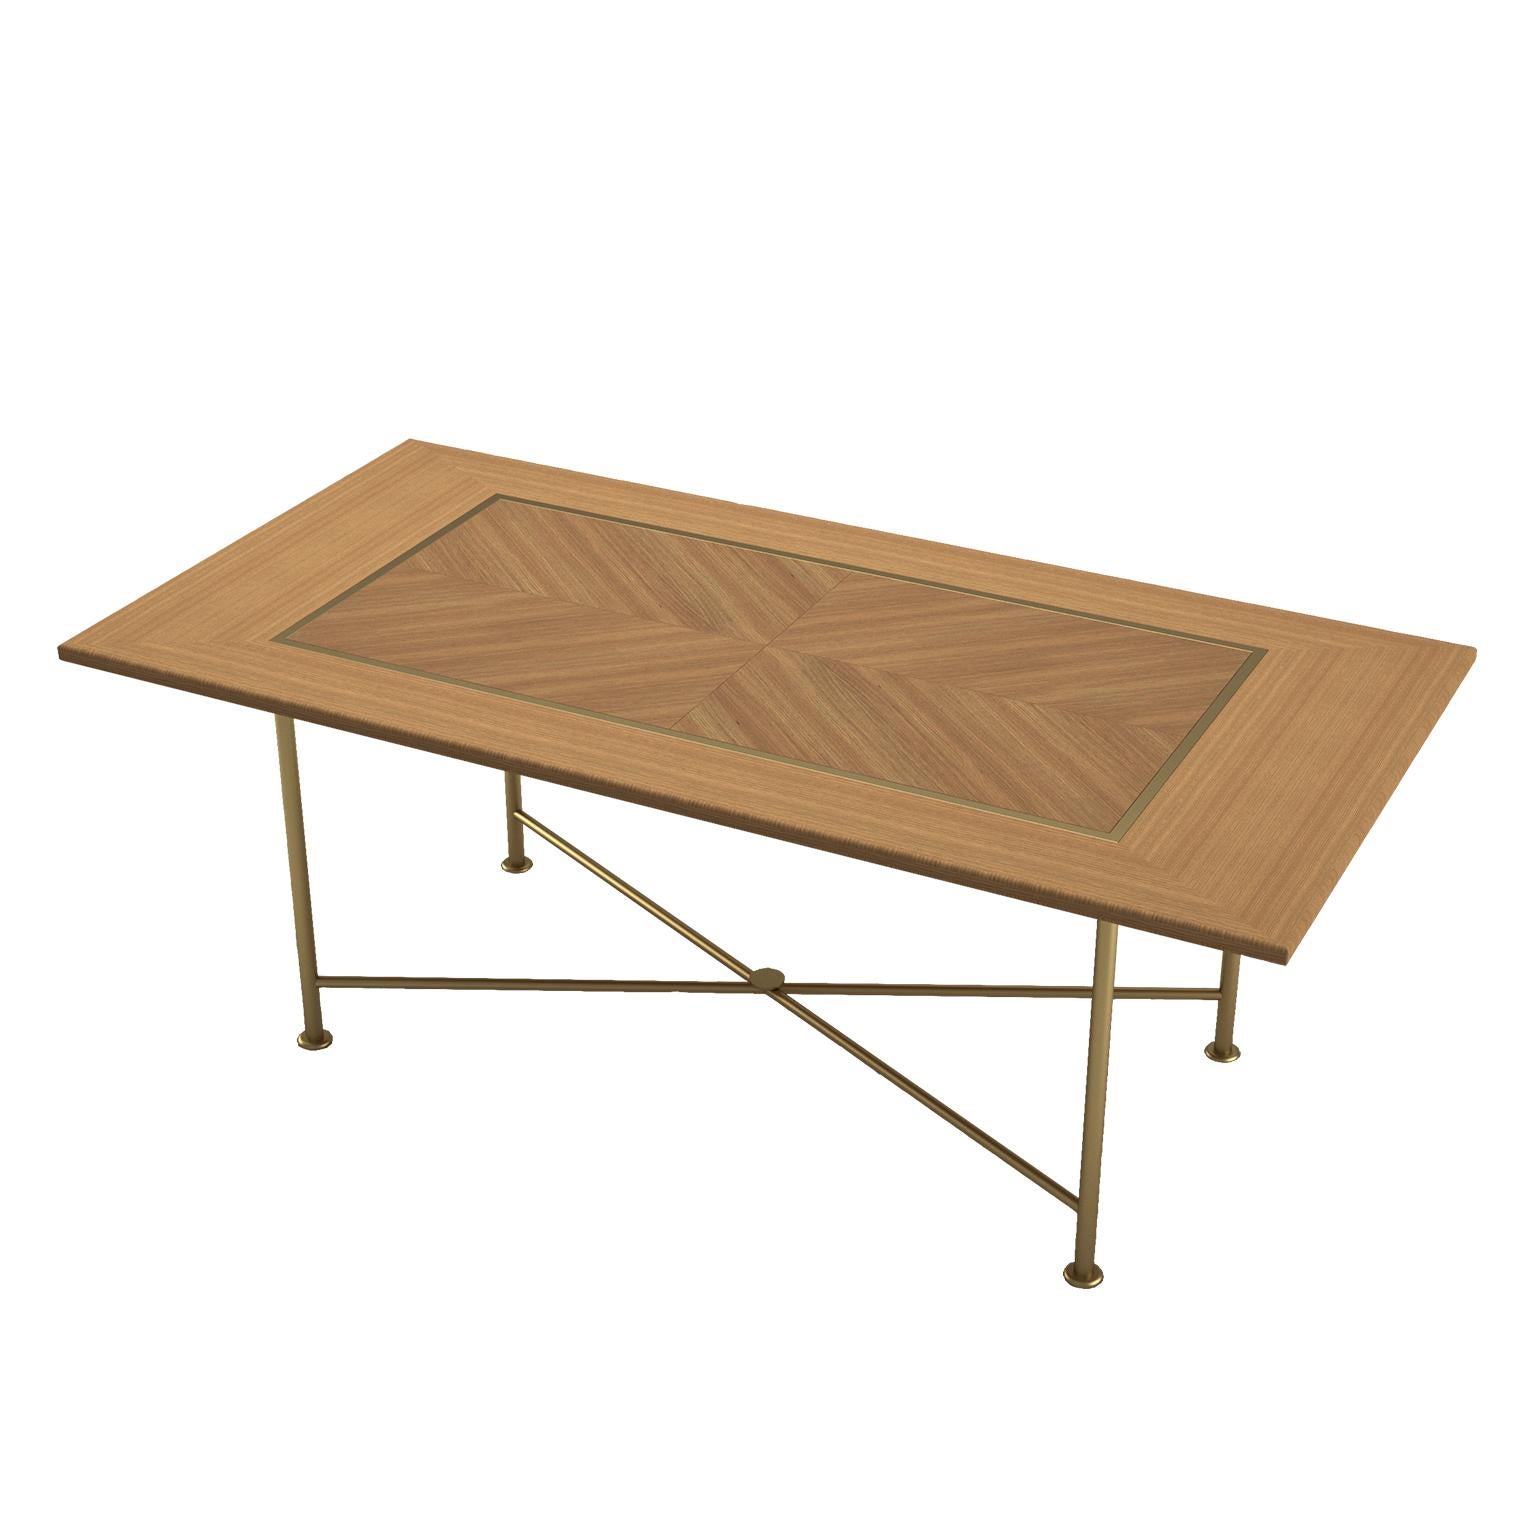 Frame dining table by Lagu
Designed by Ufuk Ceylan
Dimensions: W 220 x D 100 x H 77 cm.
Materials: brass, oak. 

With its large dimensions and light American oak table, frame table brings naturalness to your dining room with all its durability